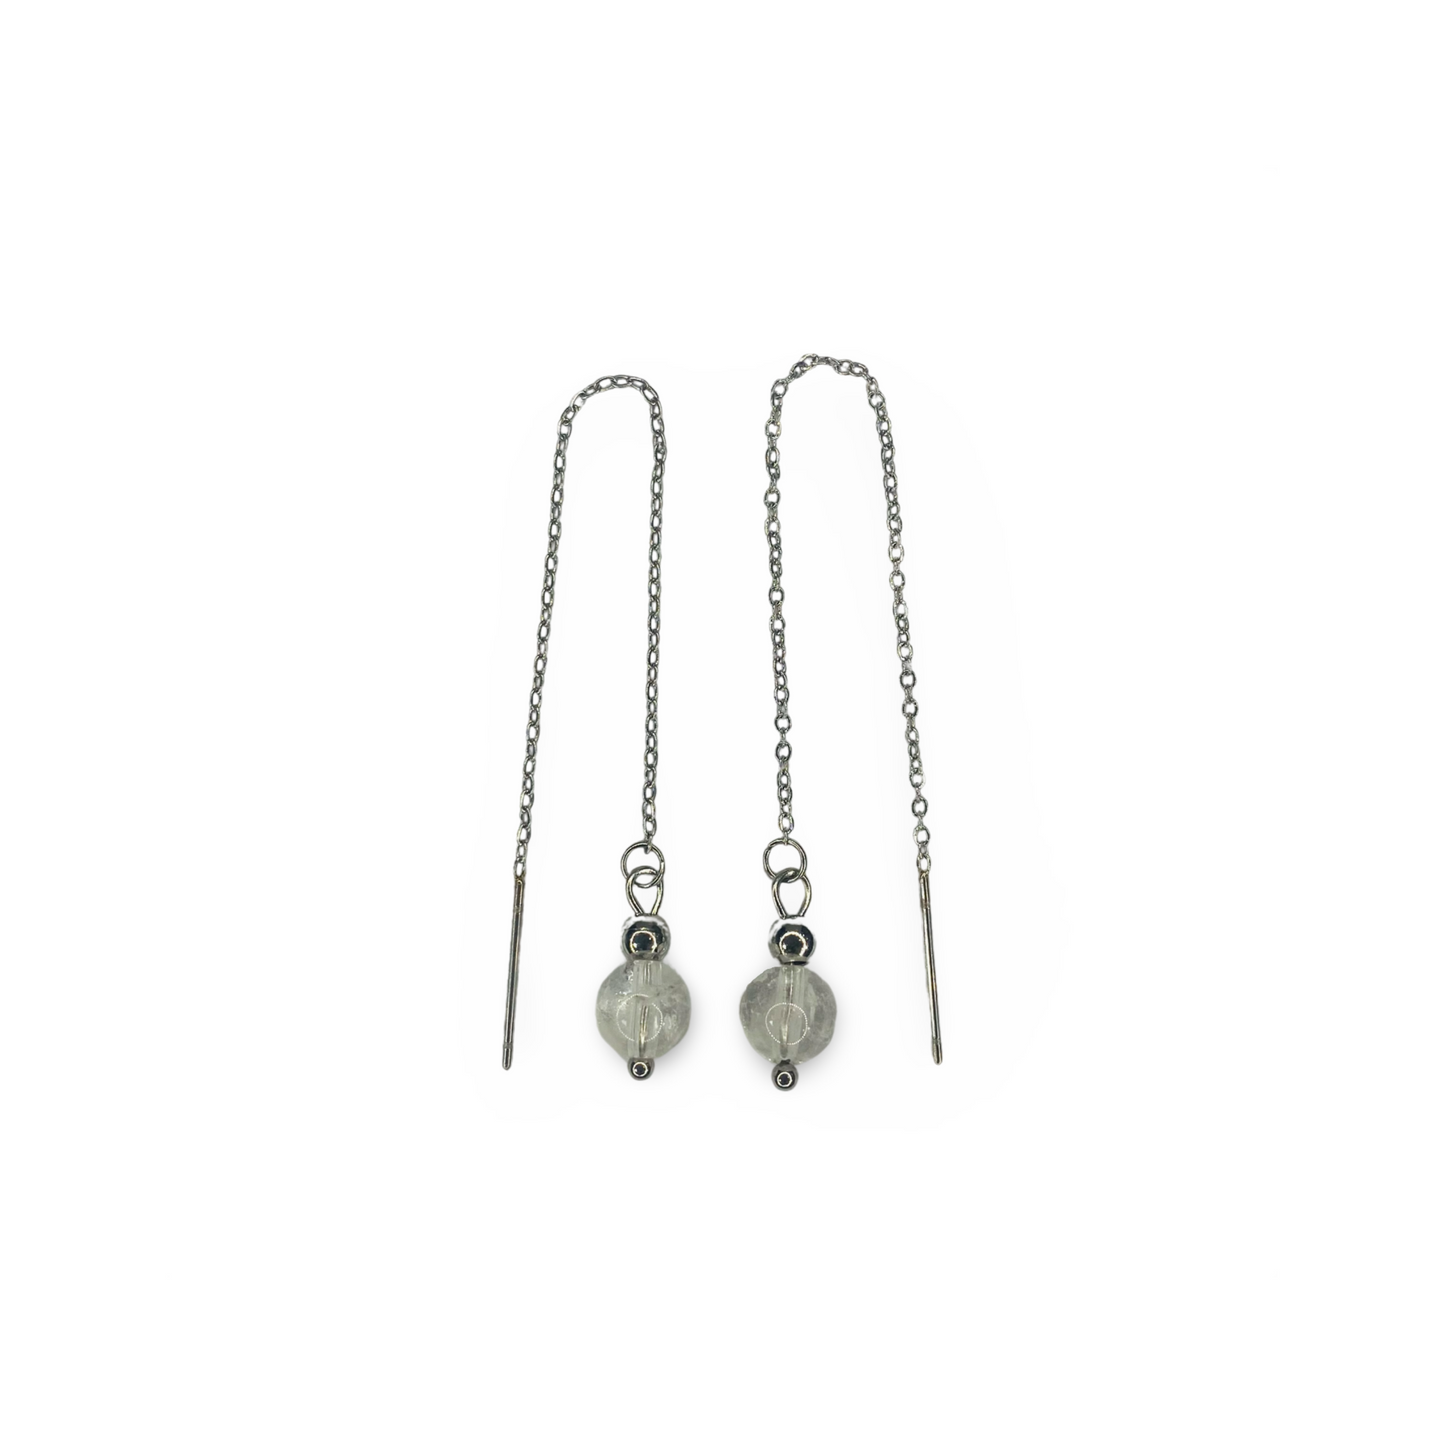 Chain Earrings with Crystal Quartz